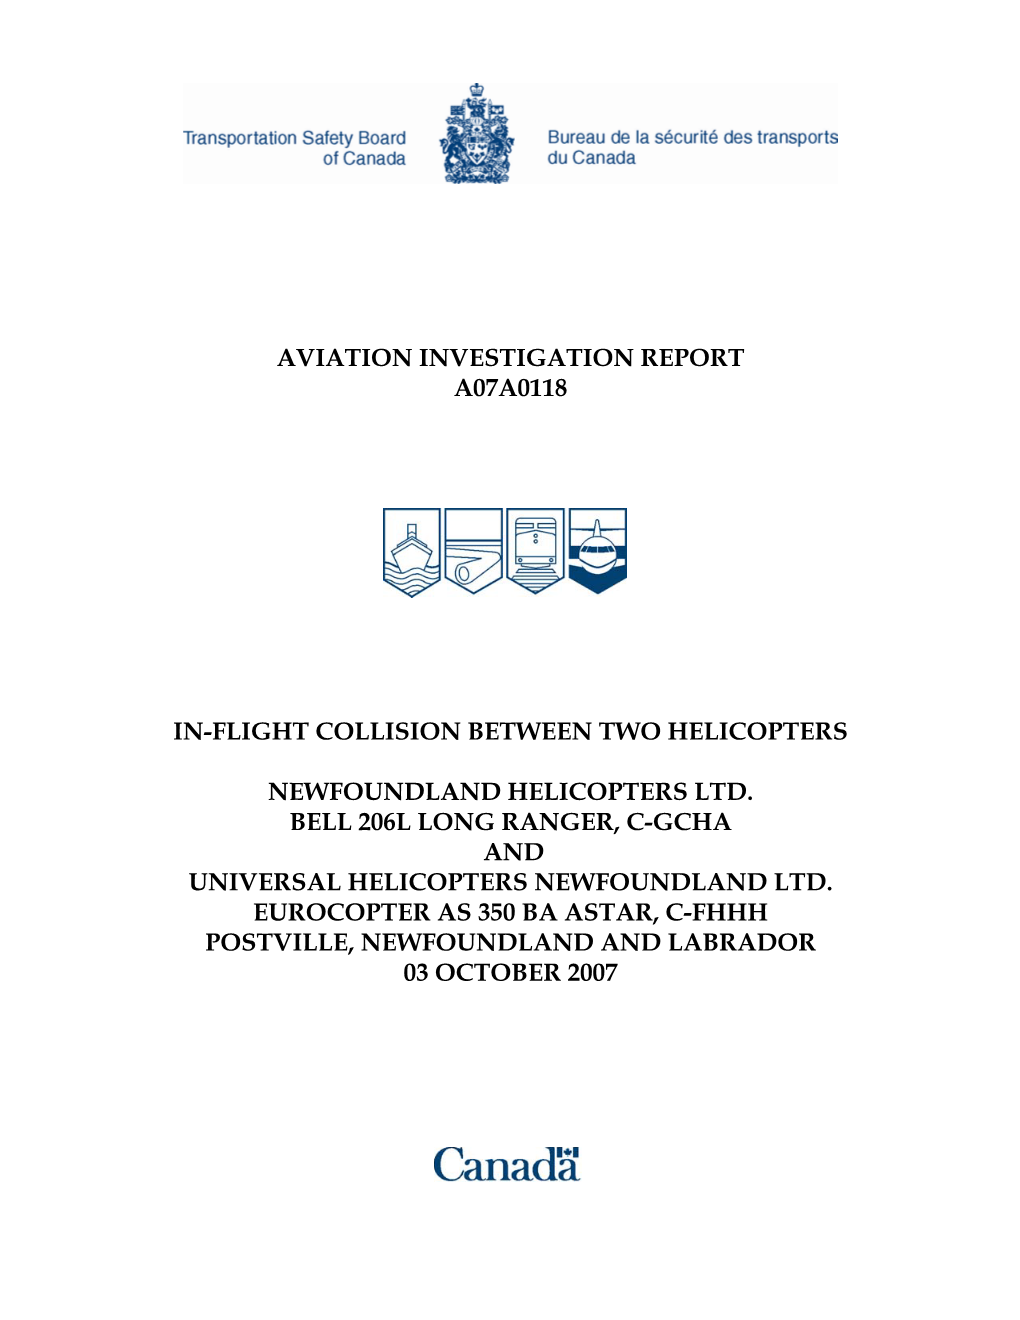 Aviation Investigation Report A07a0118 In-Flight Collision